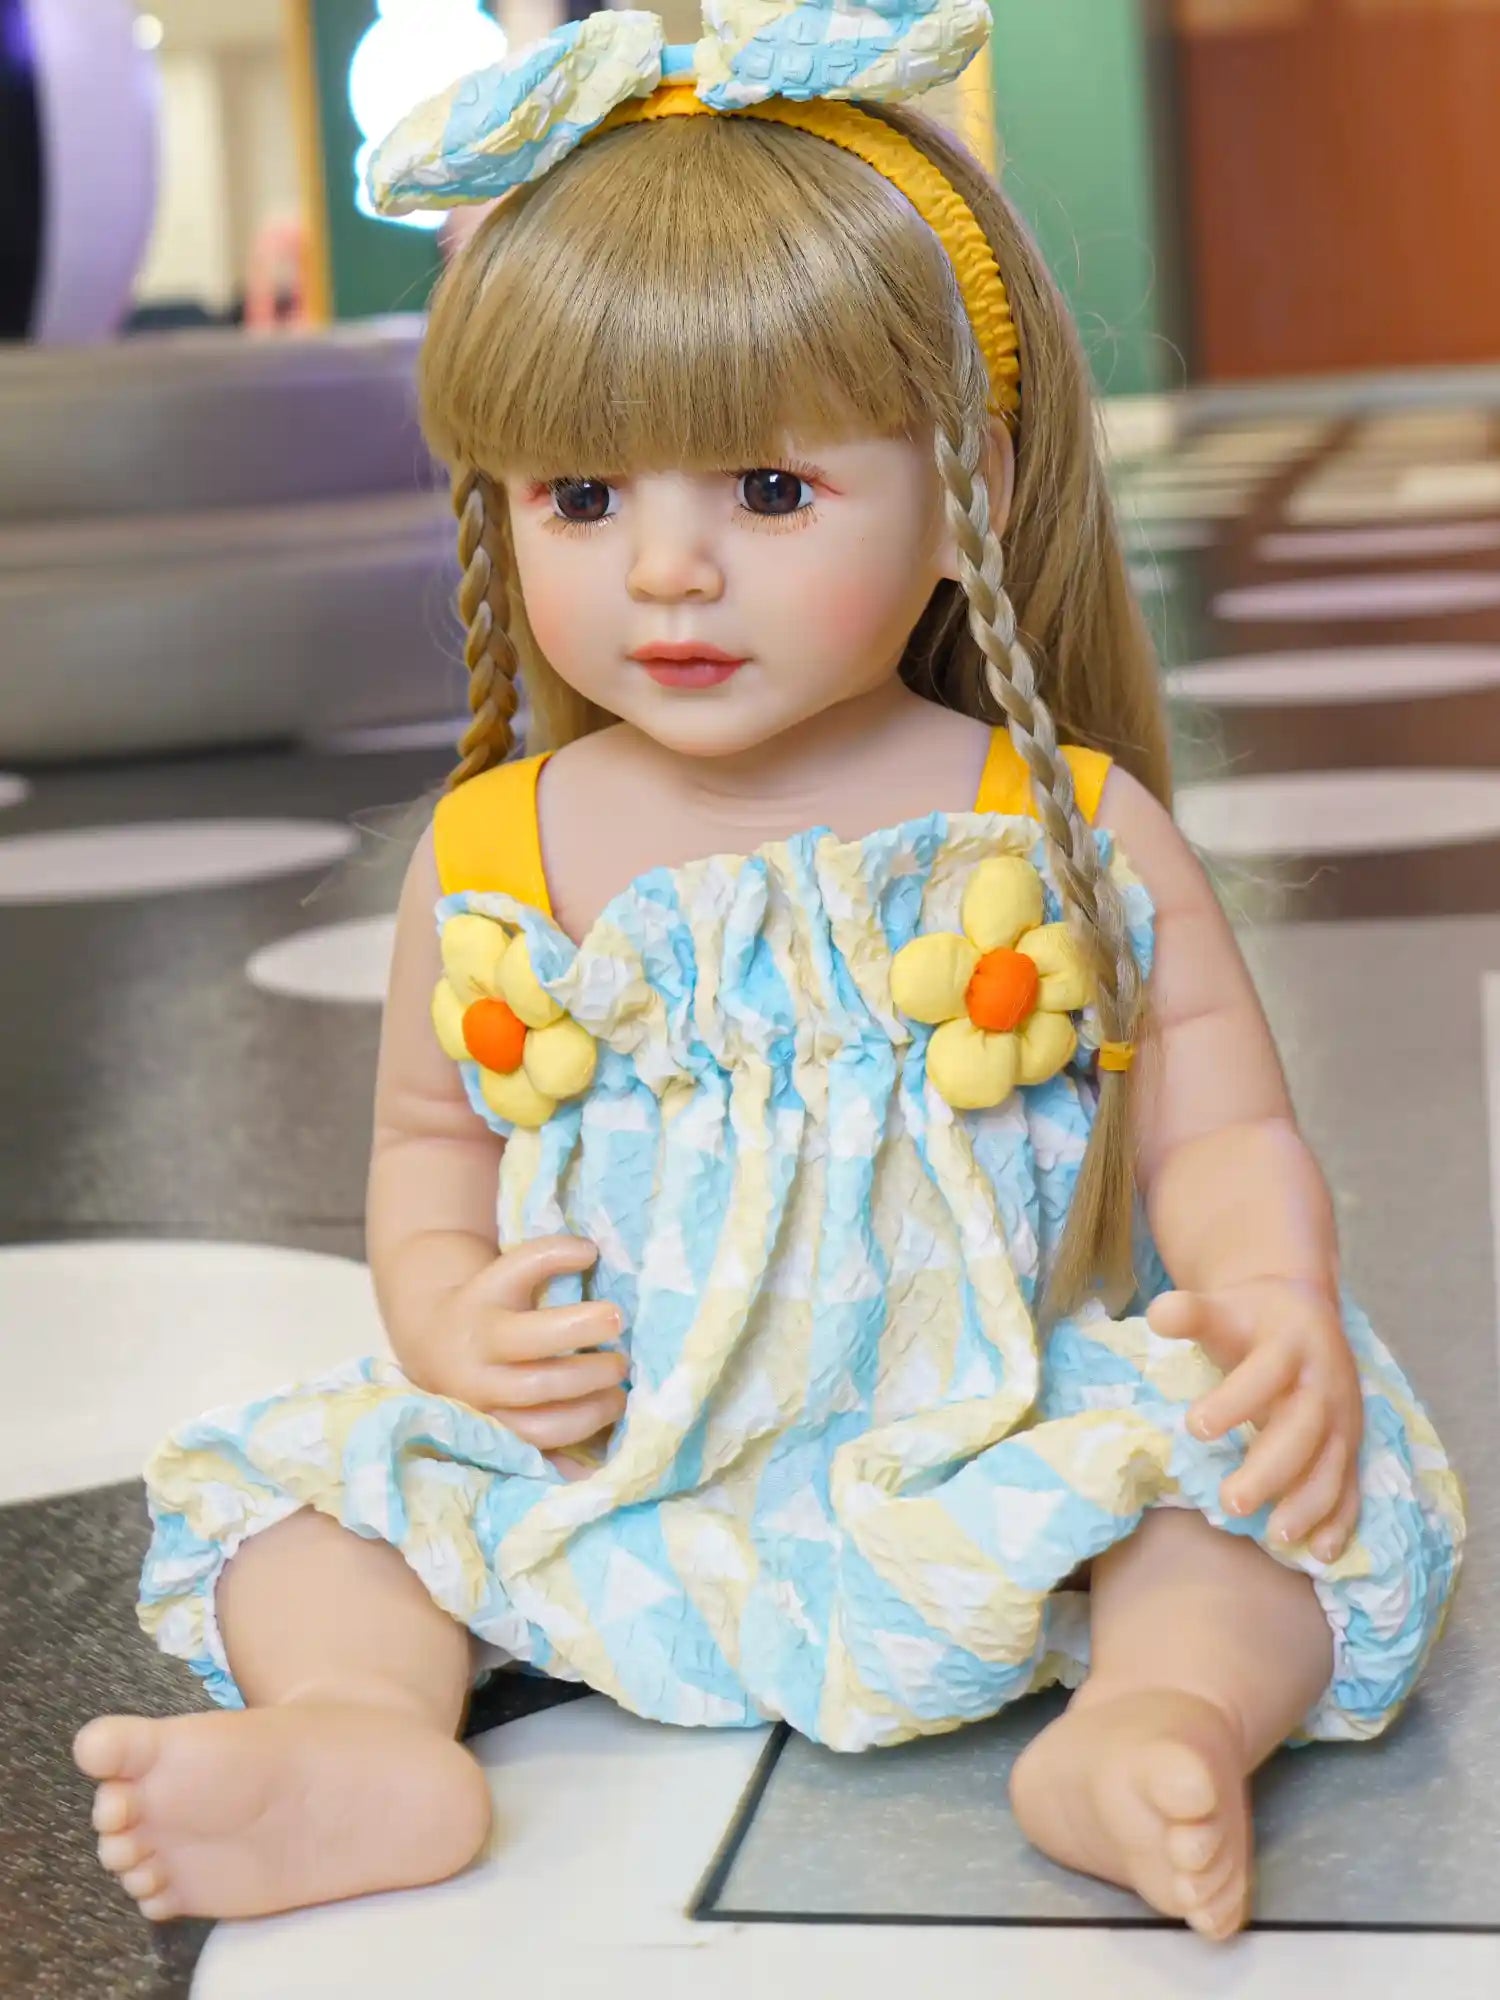 Doll with yellow hair accessories and a ruffled dress, posing with a soft gaze.